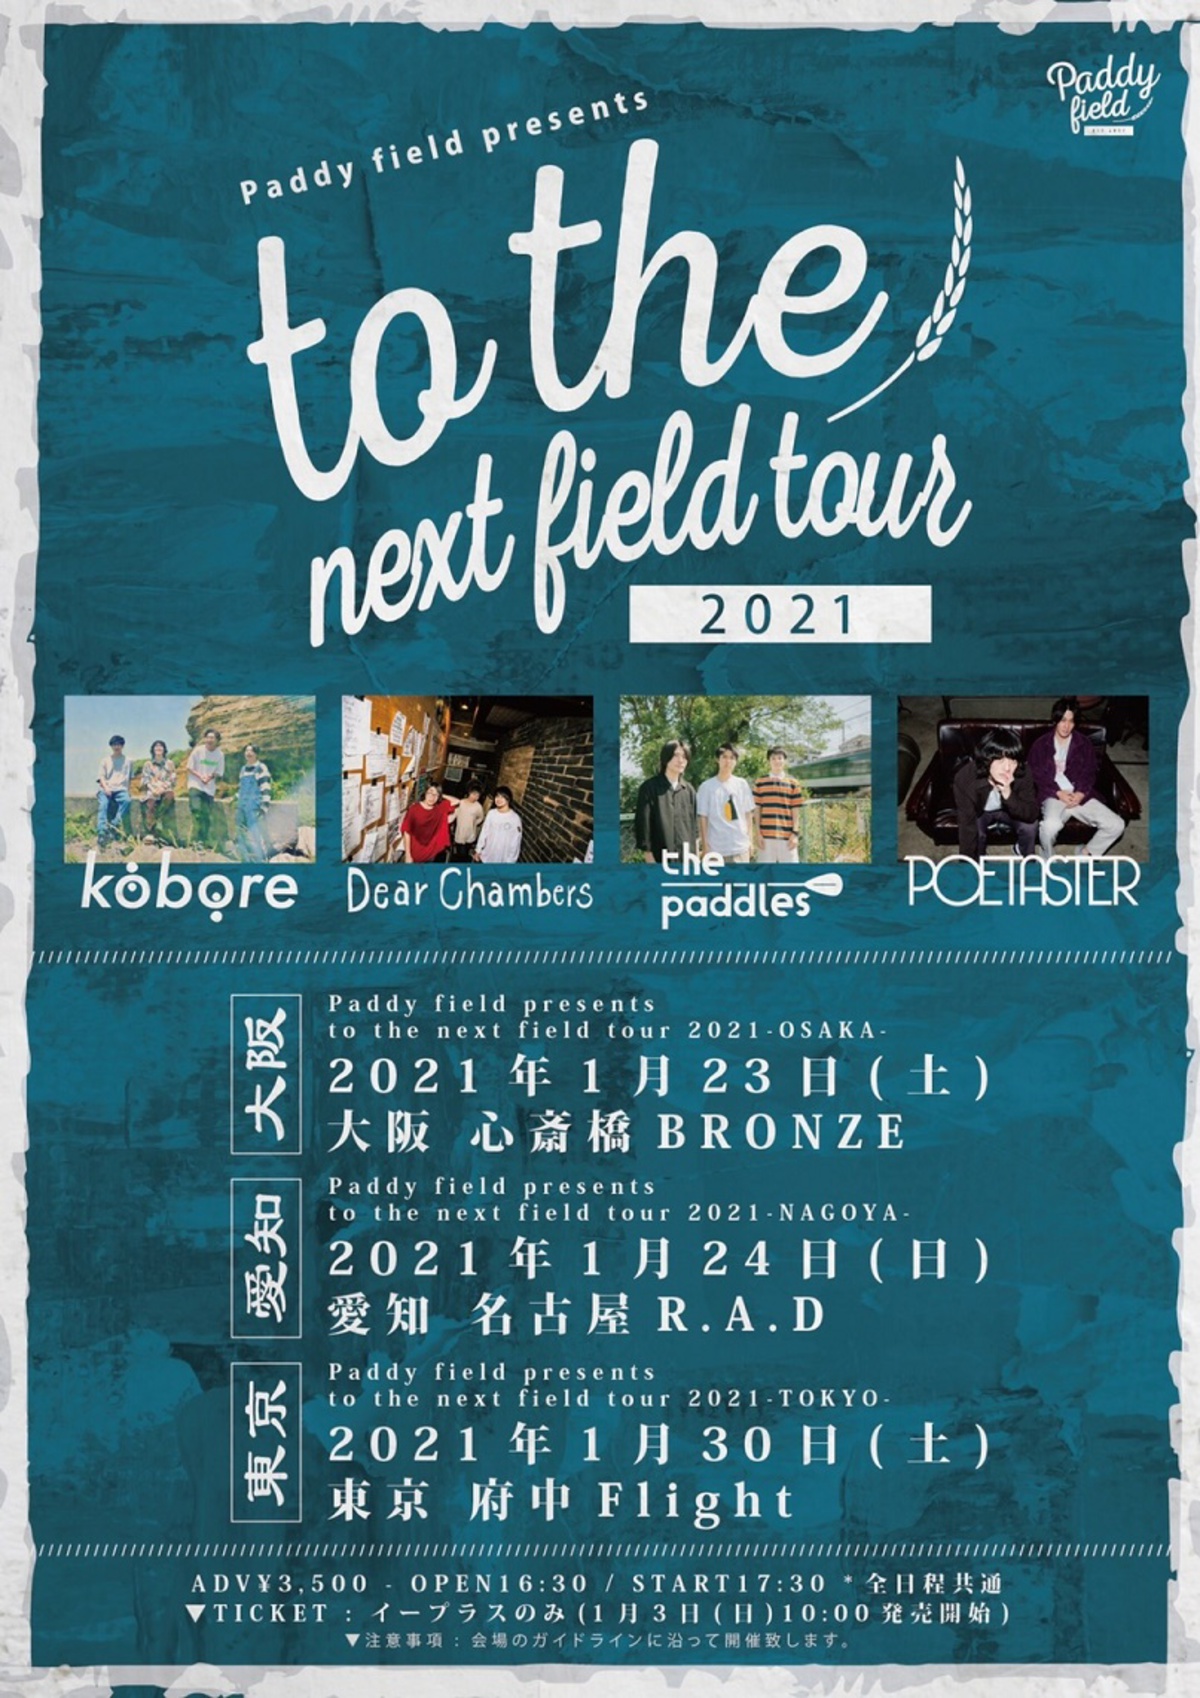 Kobore Dear Chambers The Paddles Poetaster出演 レーベル Paddy Field 主催イベント To The Next Field Tour 21 東名阪にて開催